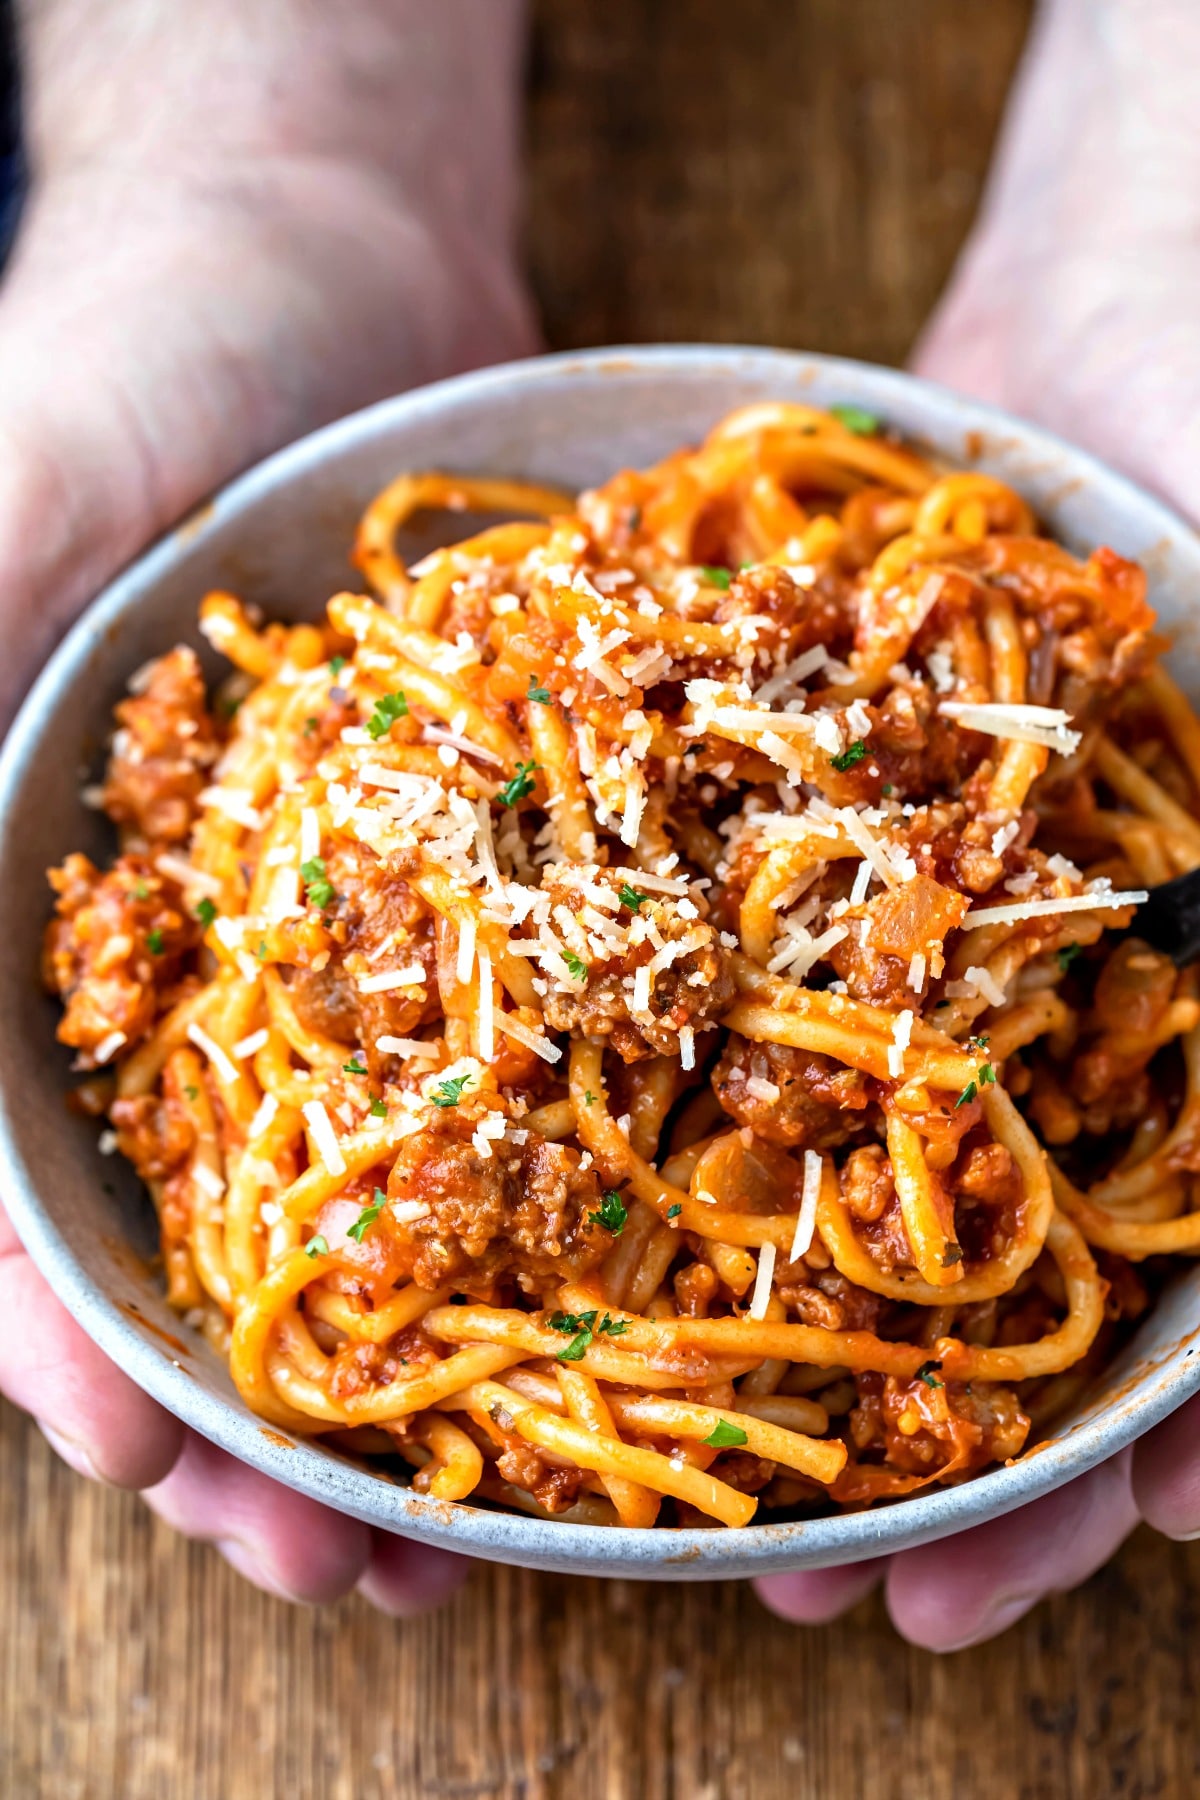 Instant Pot Spaghetti and Meat Sauce - I Heart Eating